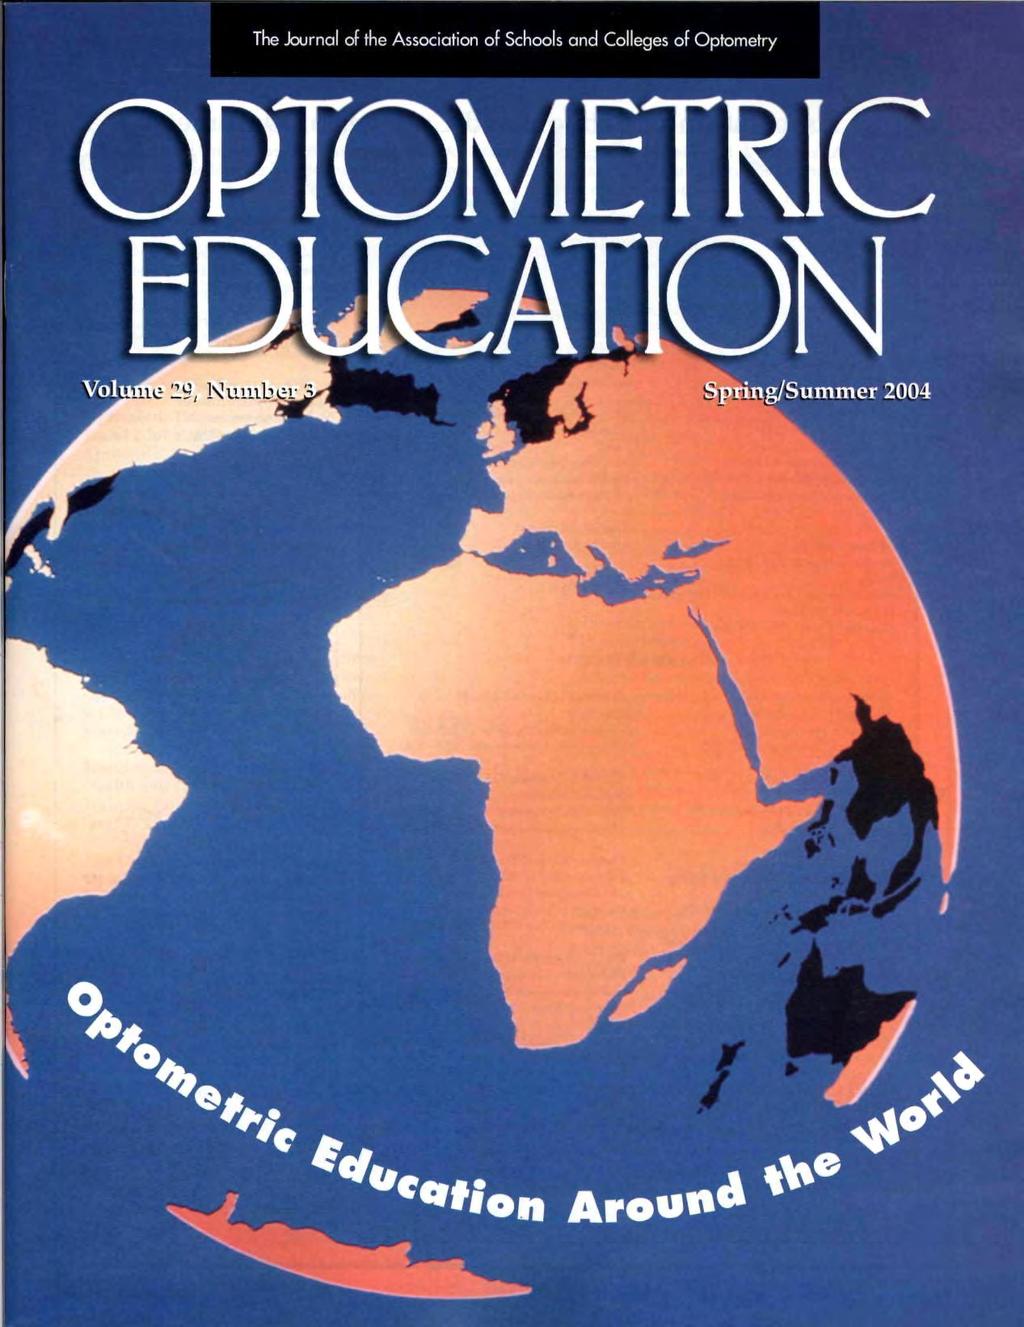 The Journal of the Association of Schools and